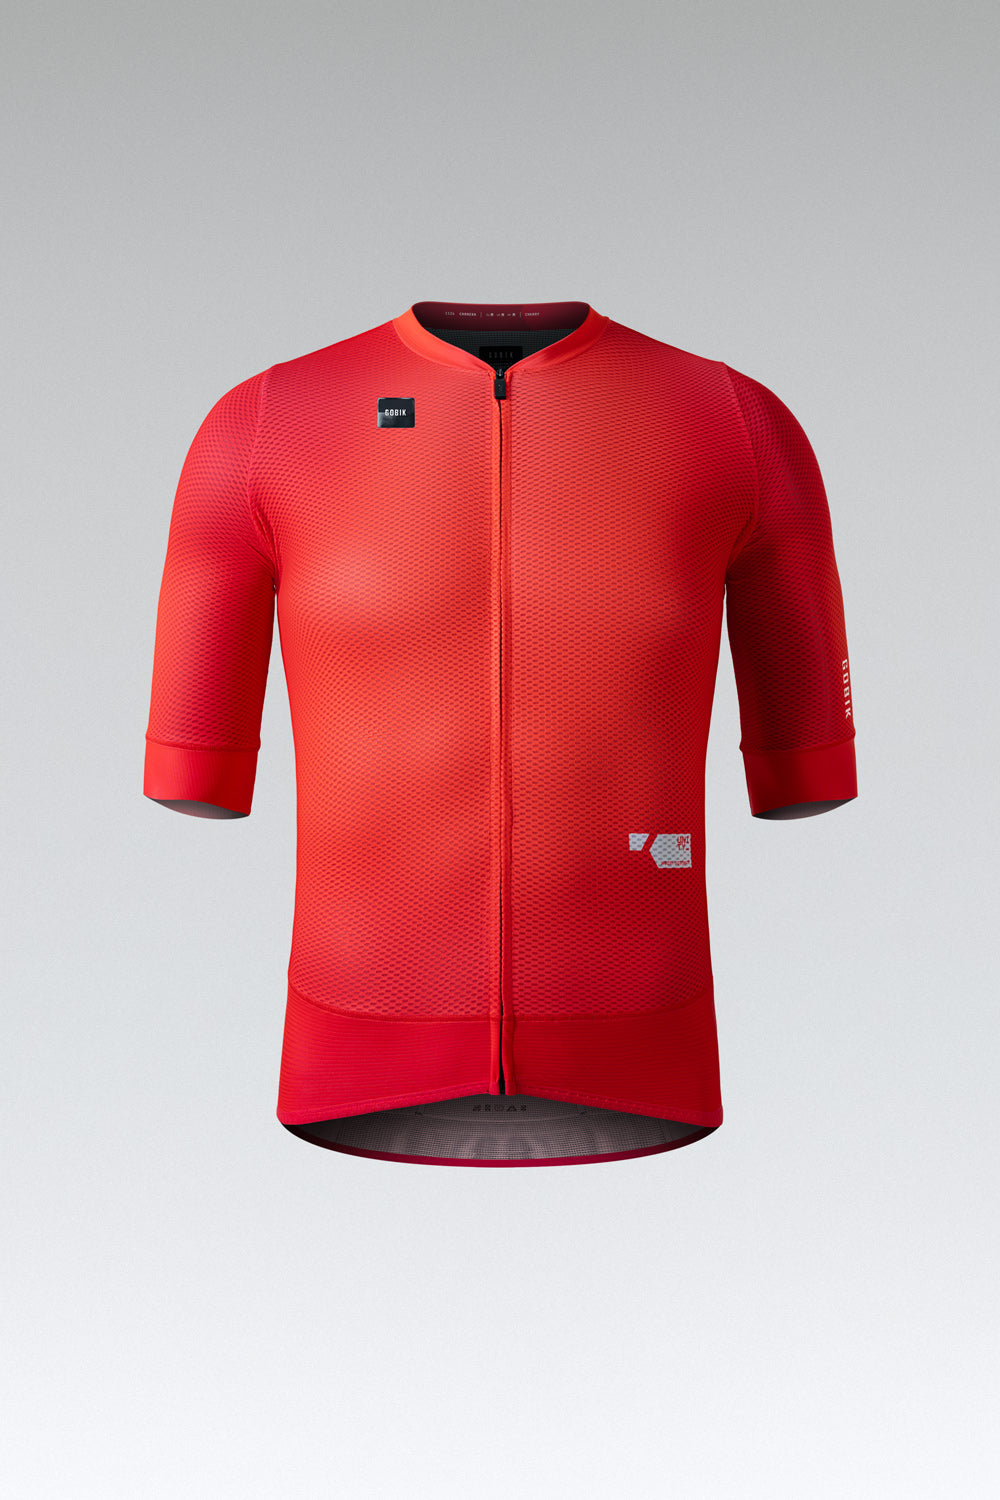 MAILLOT MANCHES COURTES CARRERA 2.0 UNISEX CHERRY